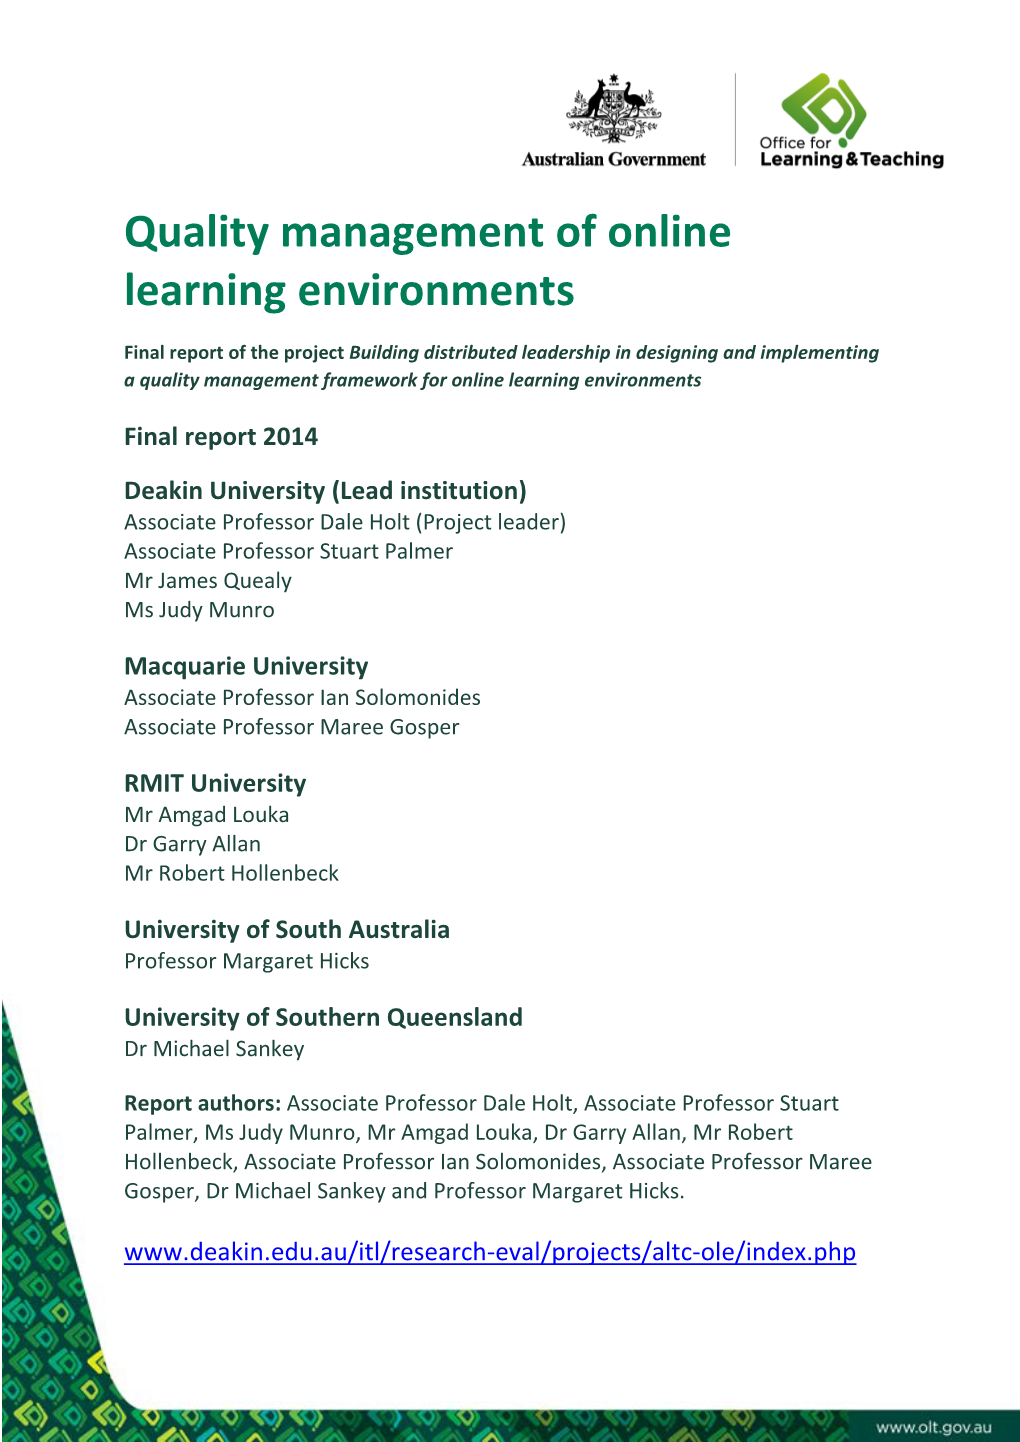 Quality Management of Online Learning Environments